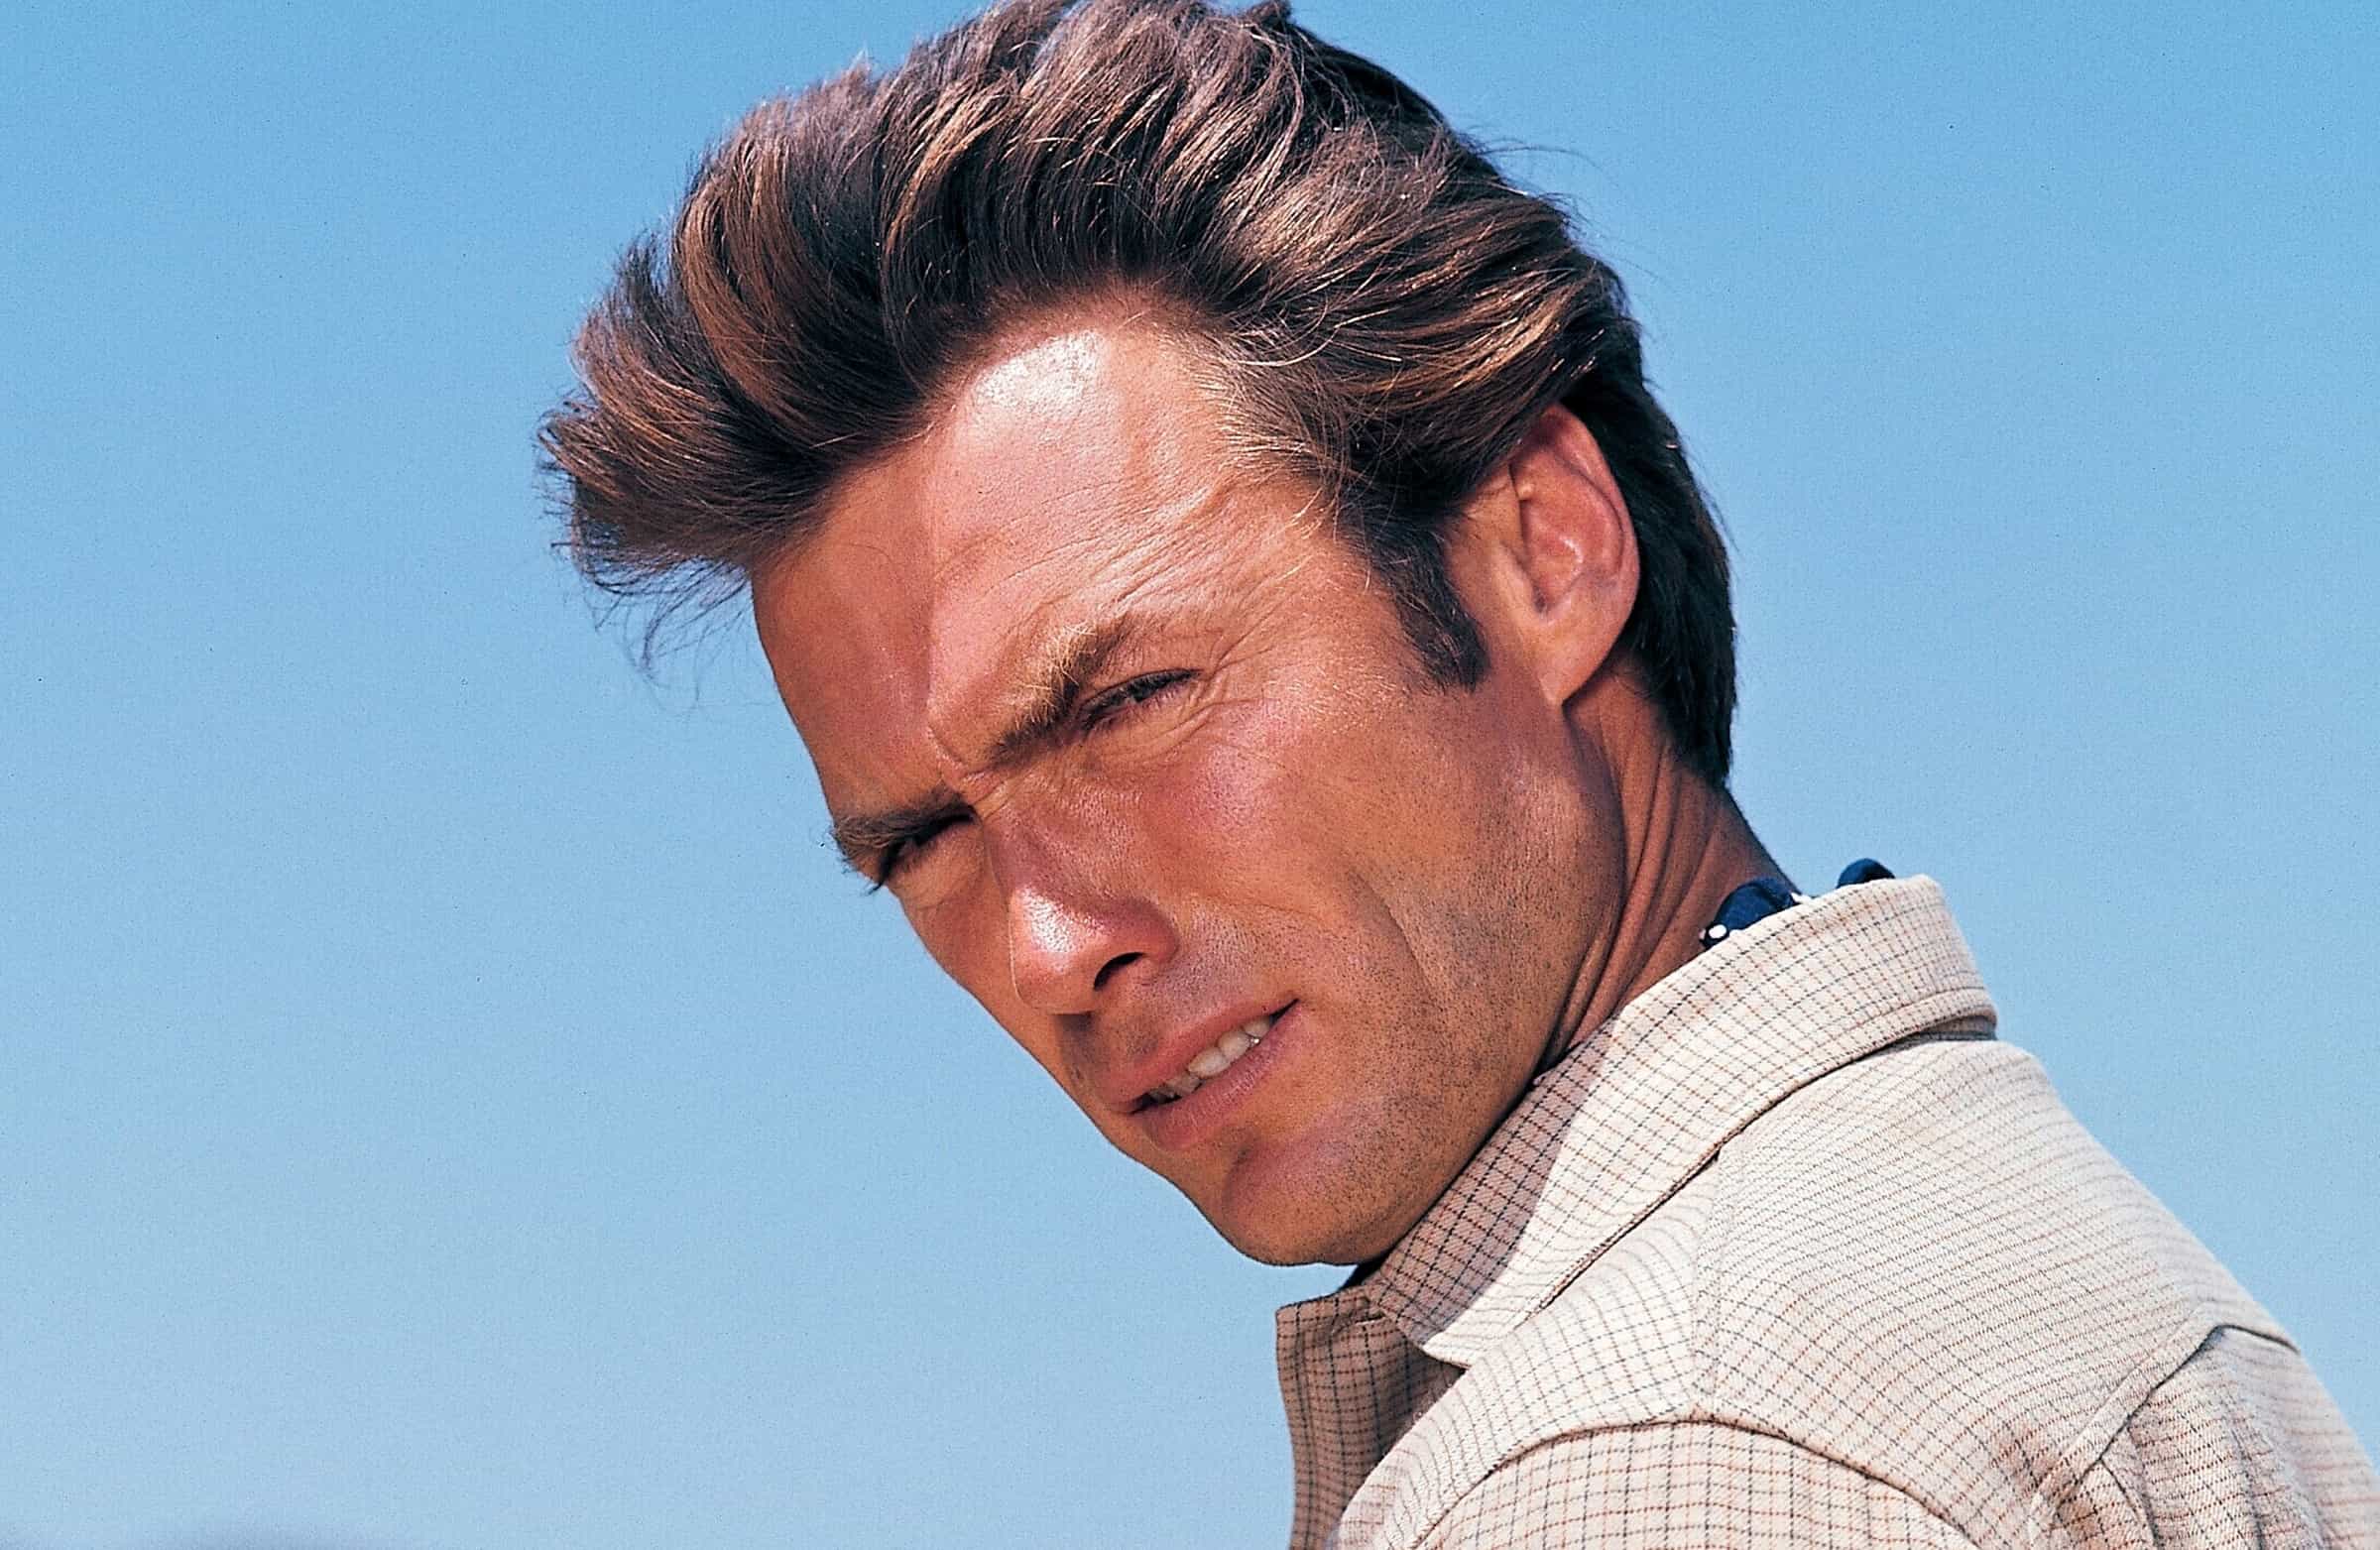 Uncover the gritty truth behind Clint Eastwood's net worth: from gun-slinging cowboy to Oscar-winning director. Saddle up for a monetary journey of true Hollywood grit.